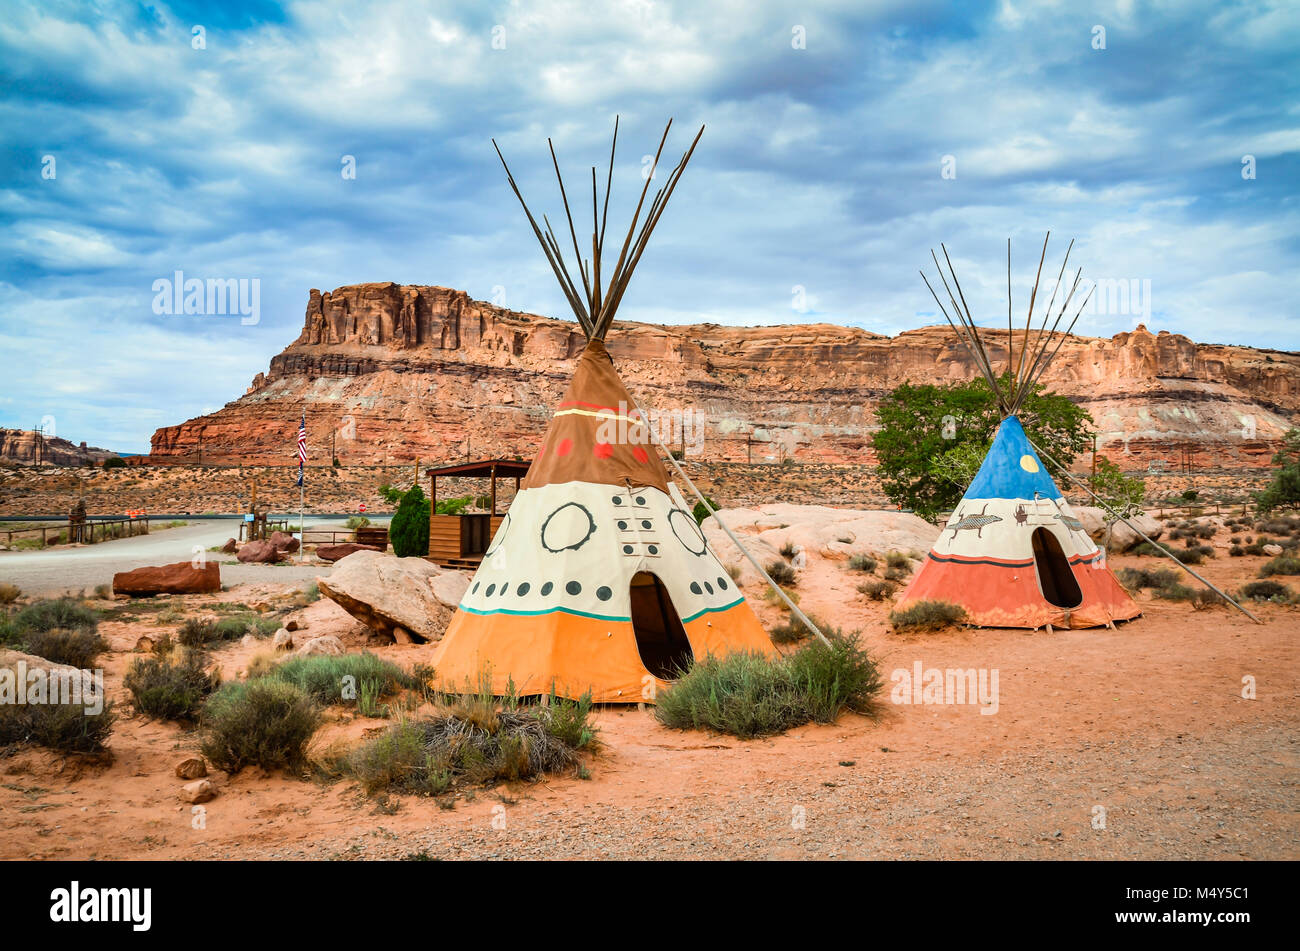 Two colorful hand-painted teepees at the entrance of Arches National Park in Maob, Utah remind visitors of the region's Native American heritage. Stock Photo